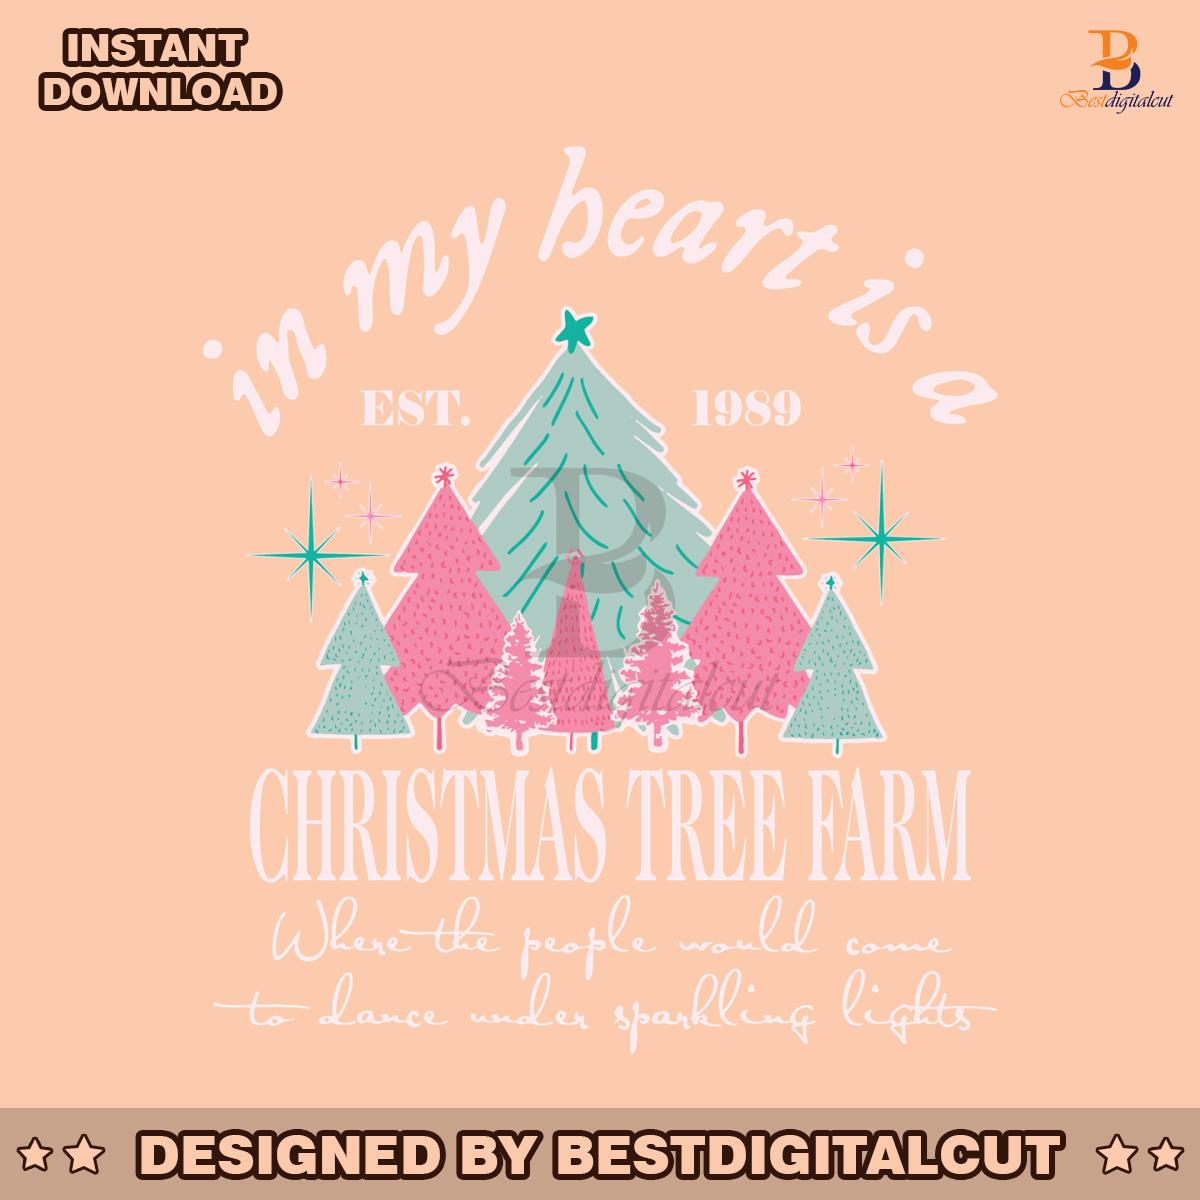 in-my-heart-is-a-christmas-tree-farm-svg-for-cricut-files